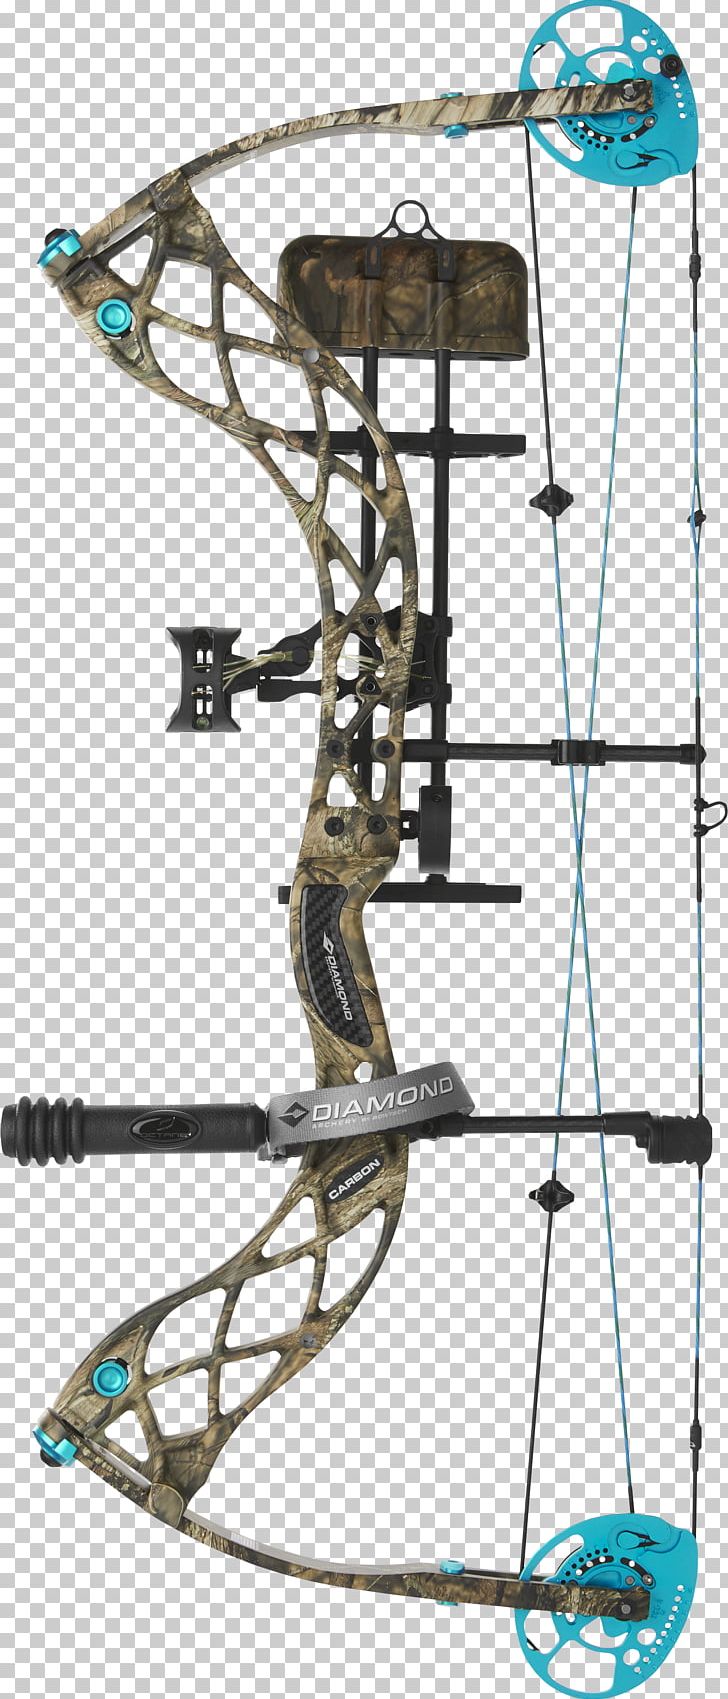 Compound Bows Archery Bow And Arrow Hunting Carbon PNG, Clipart, Archery, Arrow, Bow, Bow And Arrow, Bowtech Archery Free PNG Download